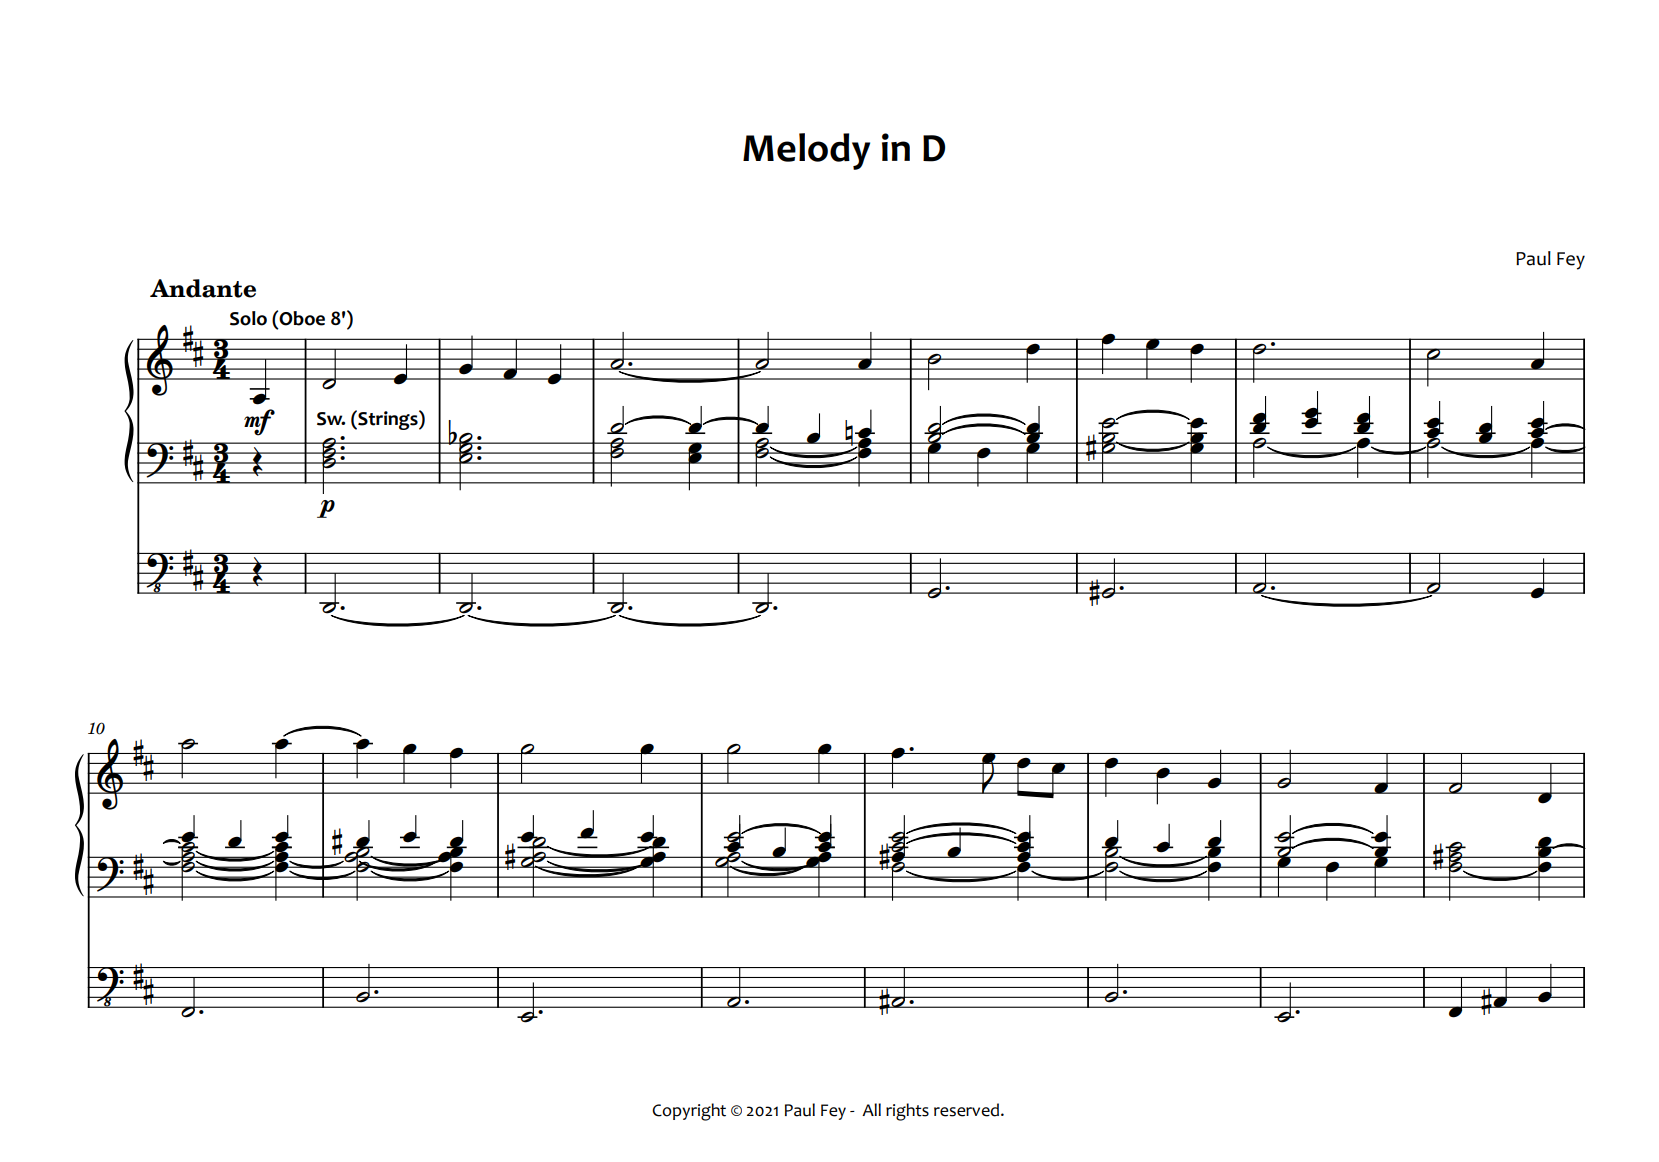 Melody in D" for Pipe Organ (Sheet Music) - Music for Organ By Paul Fey Organist